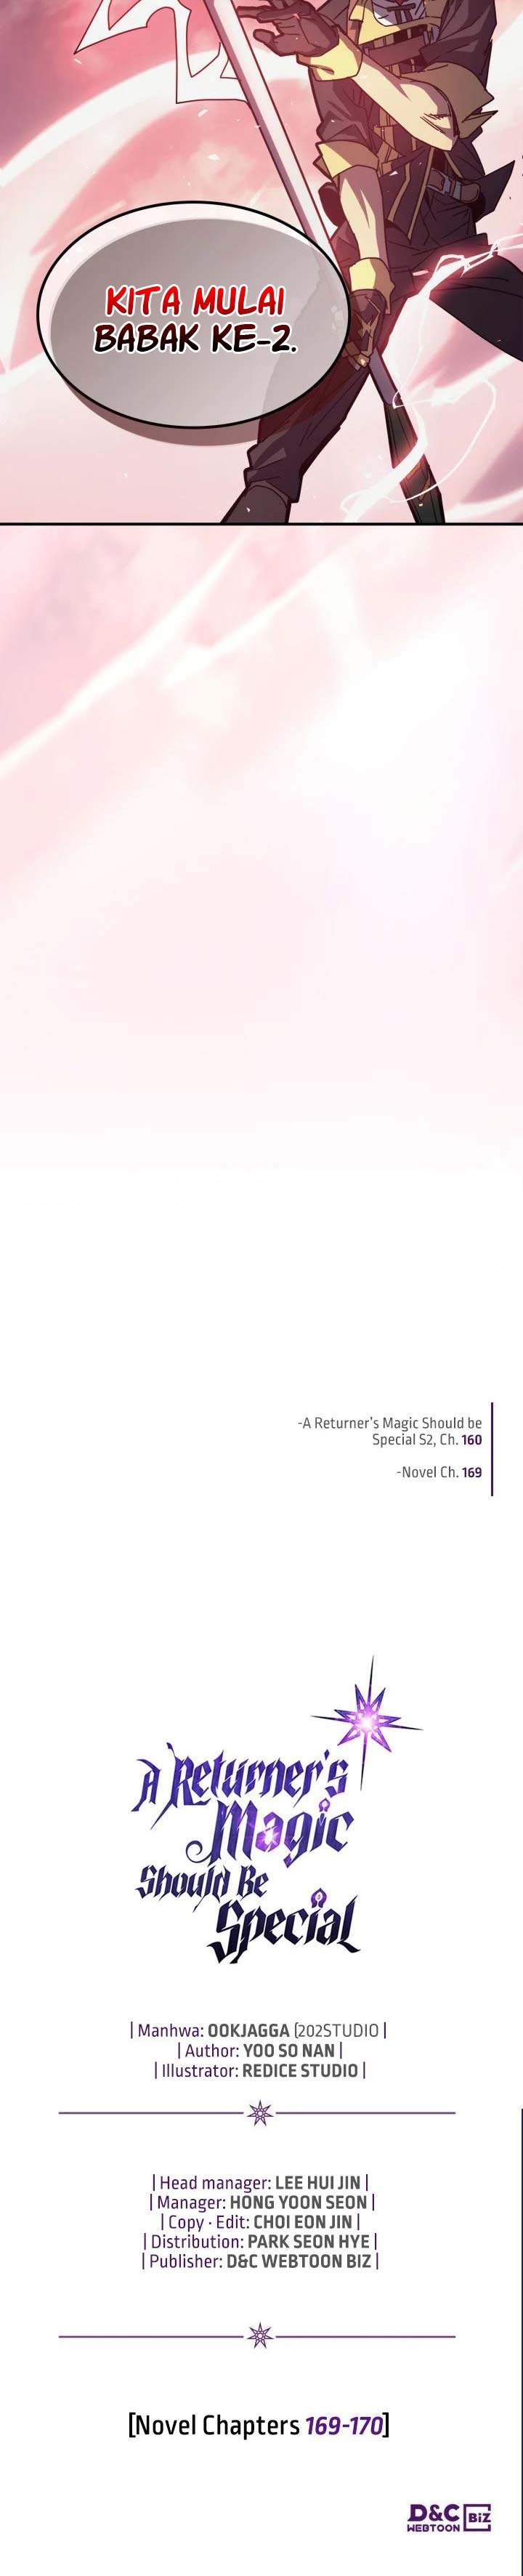 A Returner’s Magic Should Be Special Chapter 160